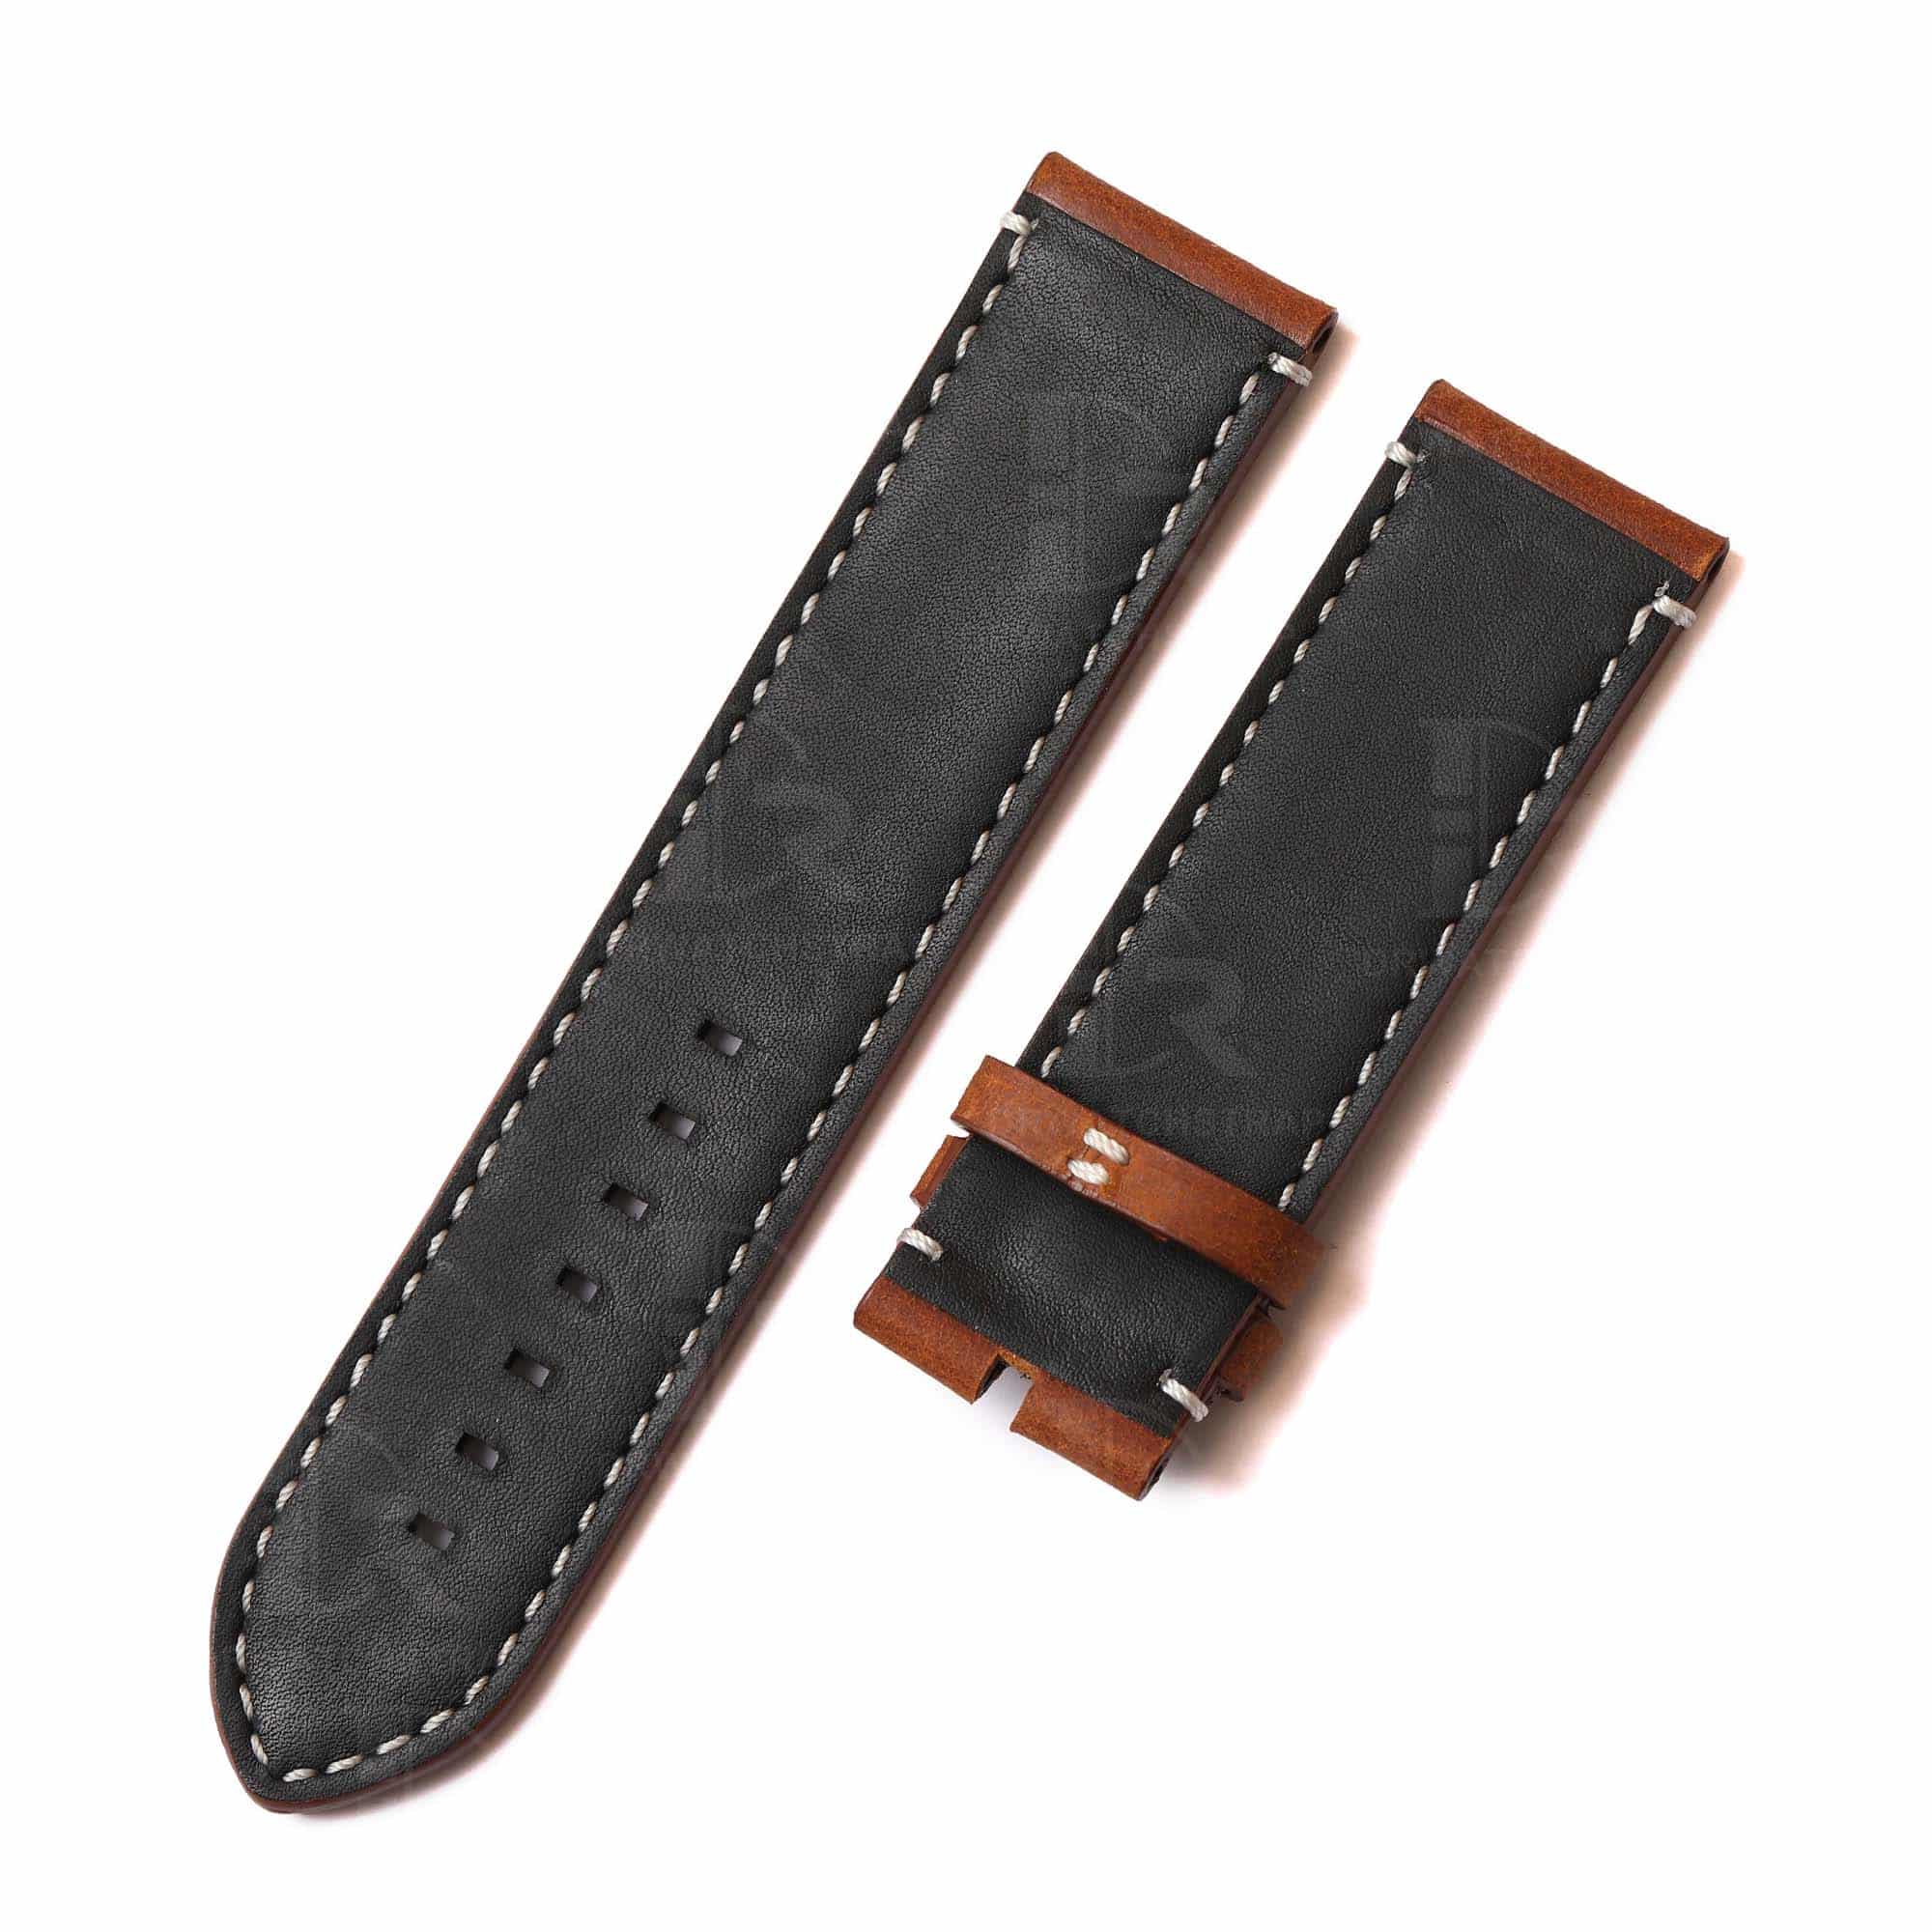 Custom best quality material brown vintage suede replacement Tudor leather watch bands and straps for Tudor Black Bay 58 41 Bronze luxury watches - Shop the OEM handmade leather strap online at a low price